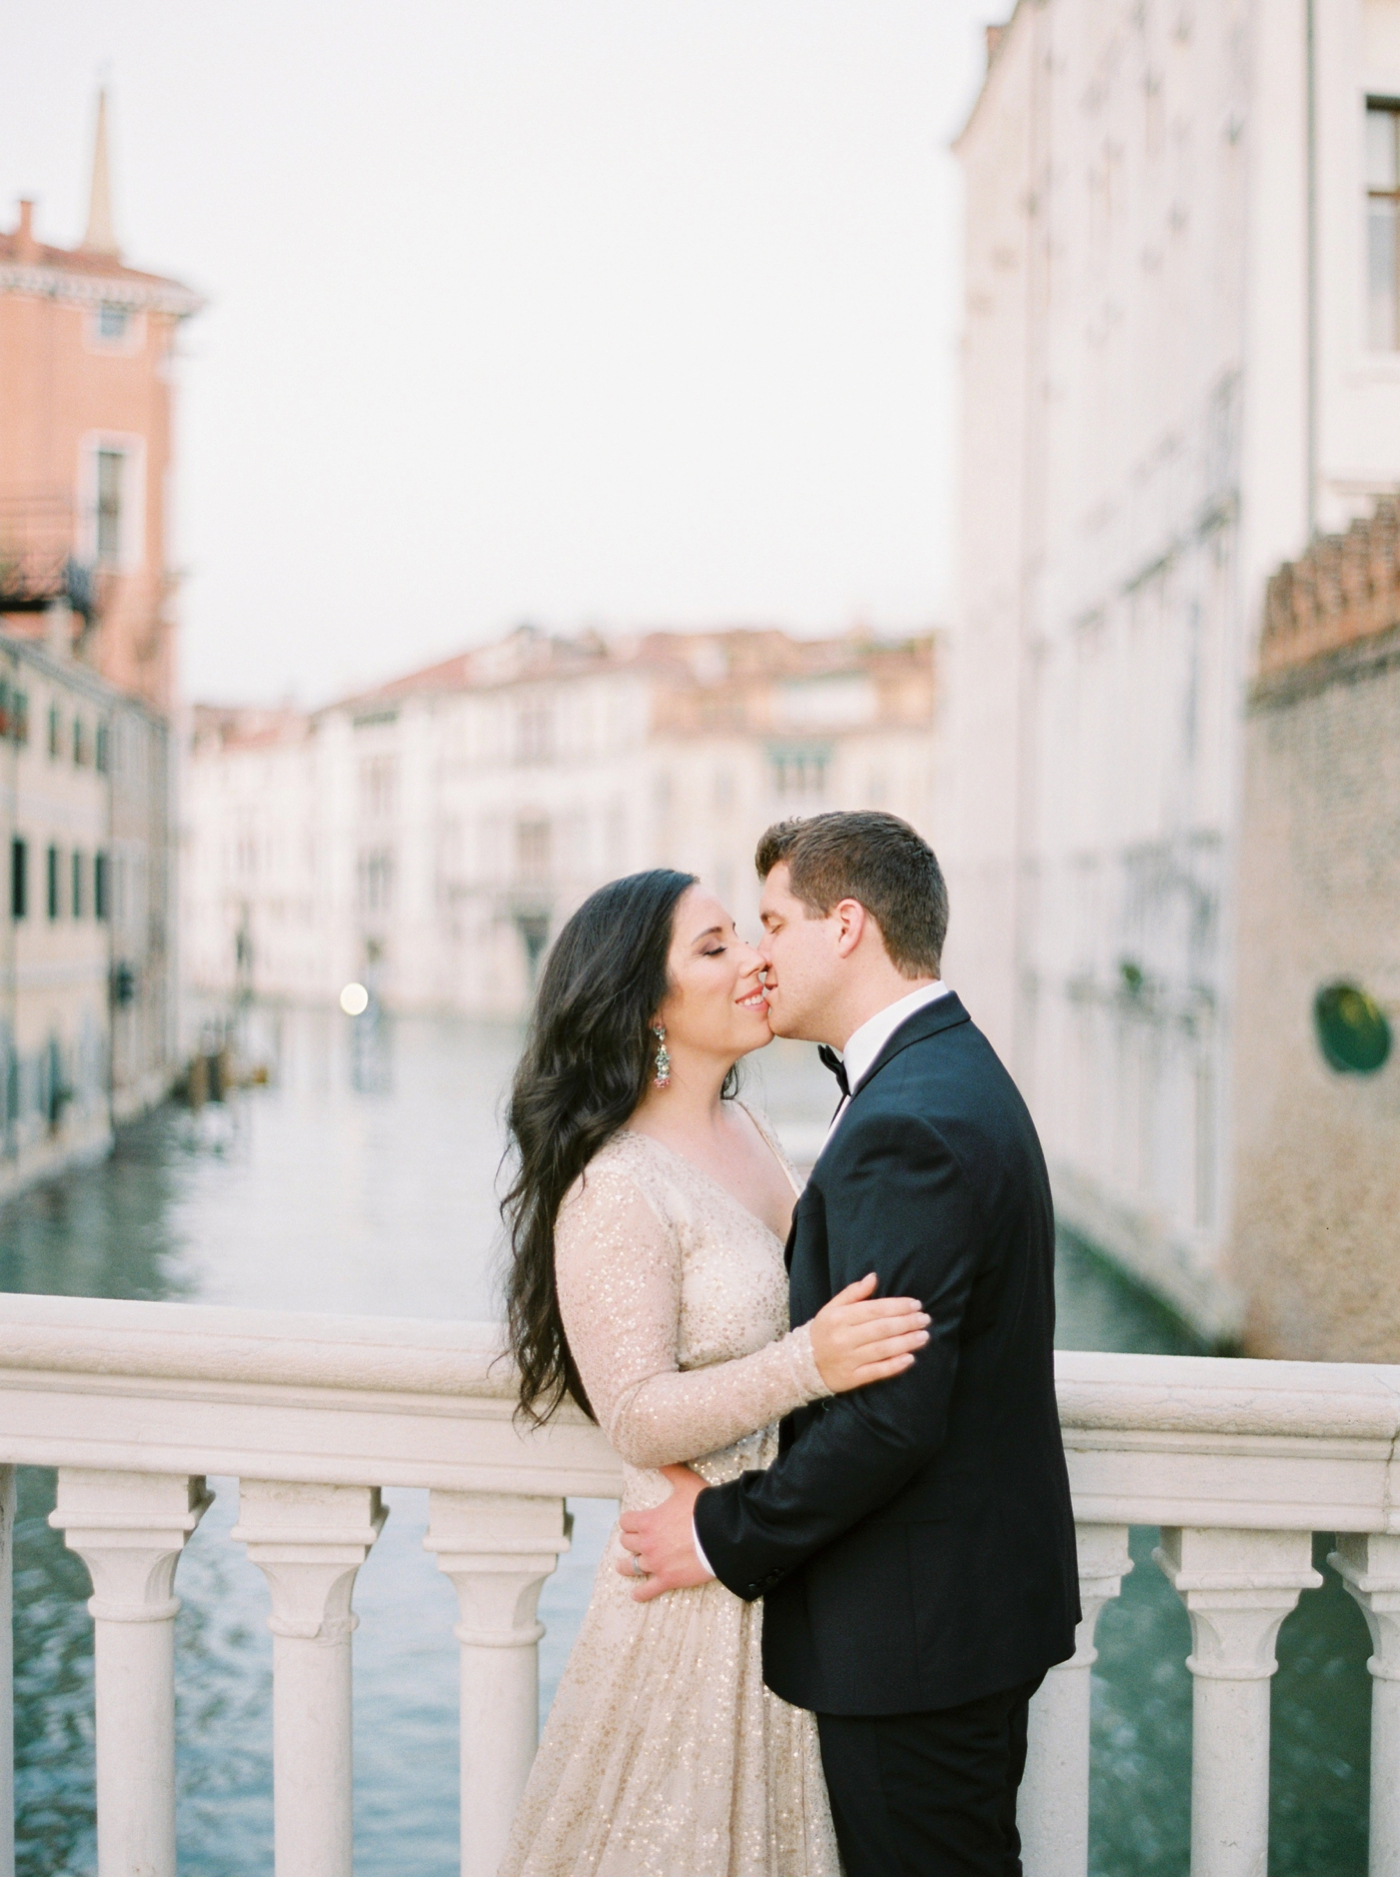 Venice italy wedding photographers | long sleeve wedding dress | italy vow renewal | justine milton fine art film photographer | bride and groom portraits in venice canals